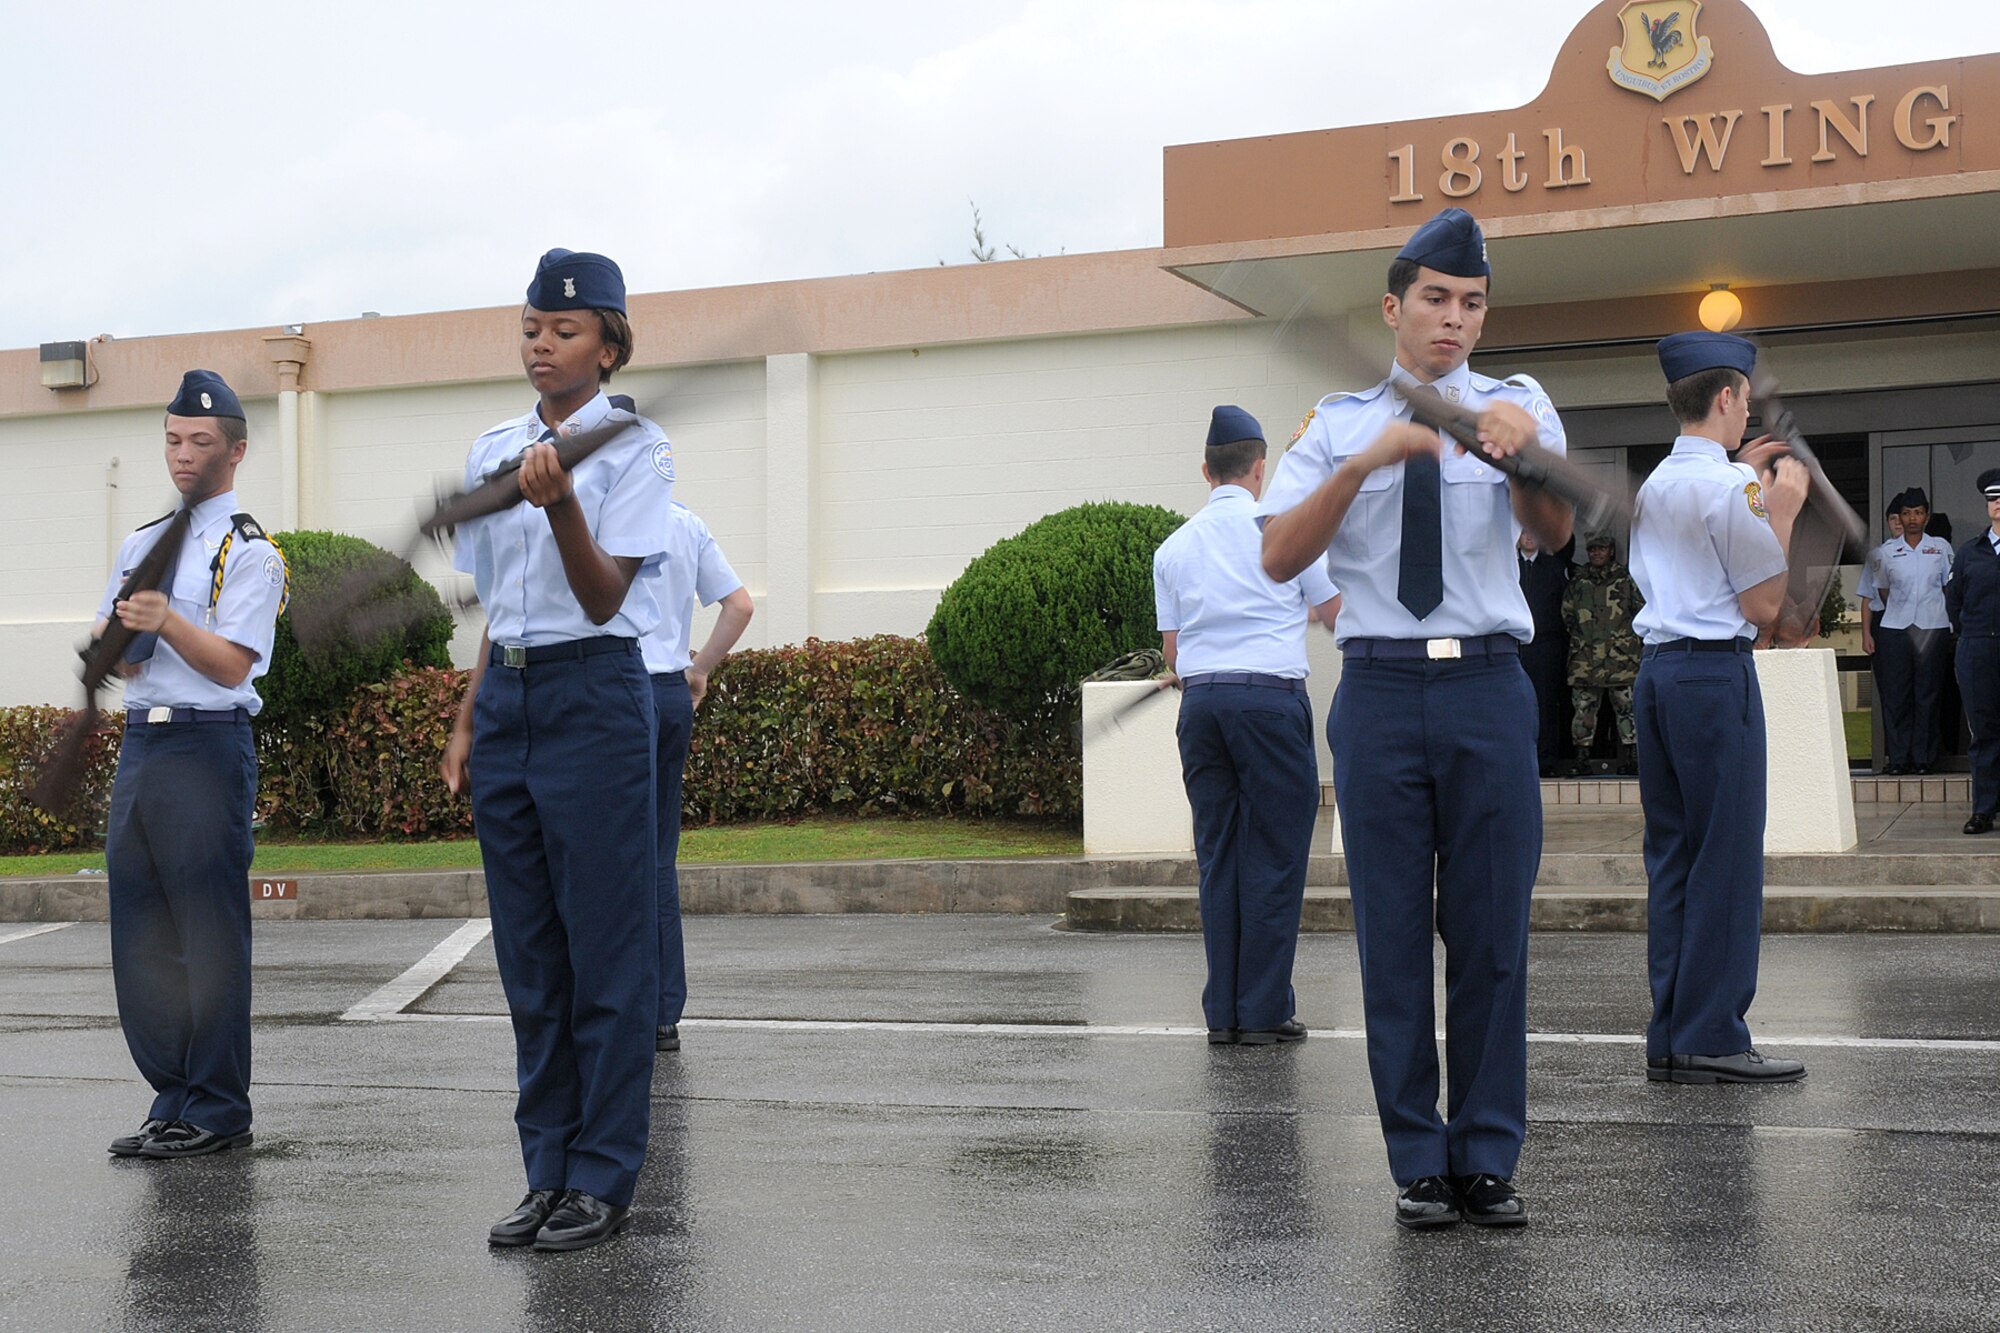 Members of Kadena High School's Junior ROTC perform rifle drill maneuvers
during the Veteran's Day Ceremony held at Kadena Air Base, Japan Nov. 11,
2008. The ceremony was held to honor all who have served in defense of the
United States of America. (U.S. Air Force photo/Airman 1st Class Chad
Warren)
